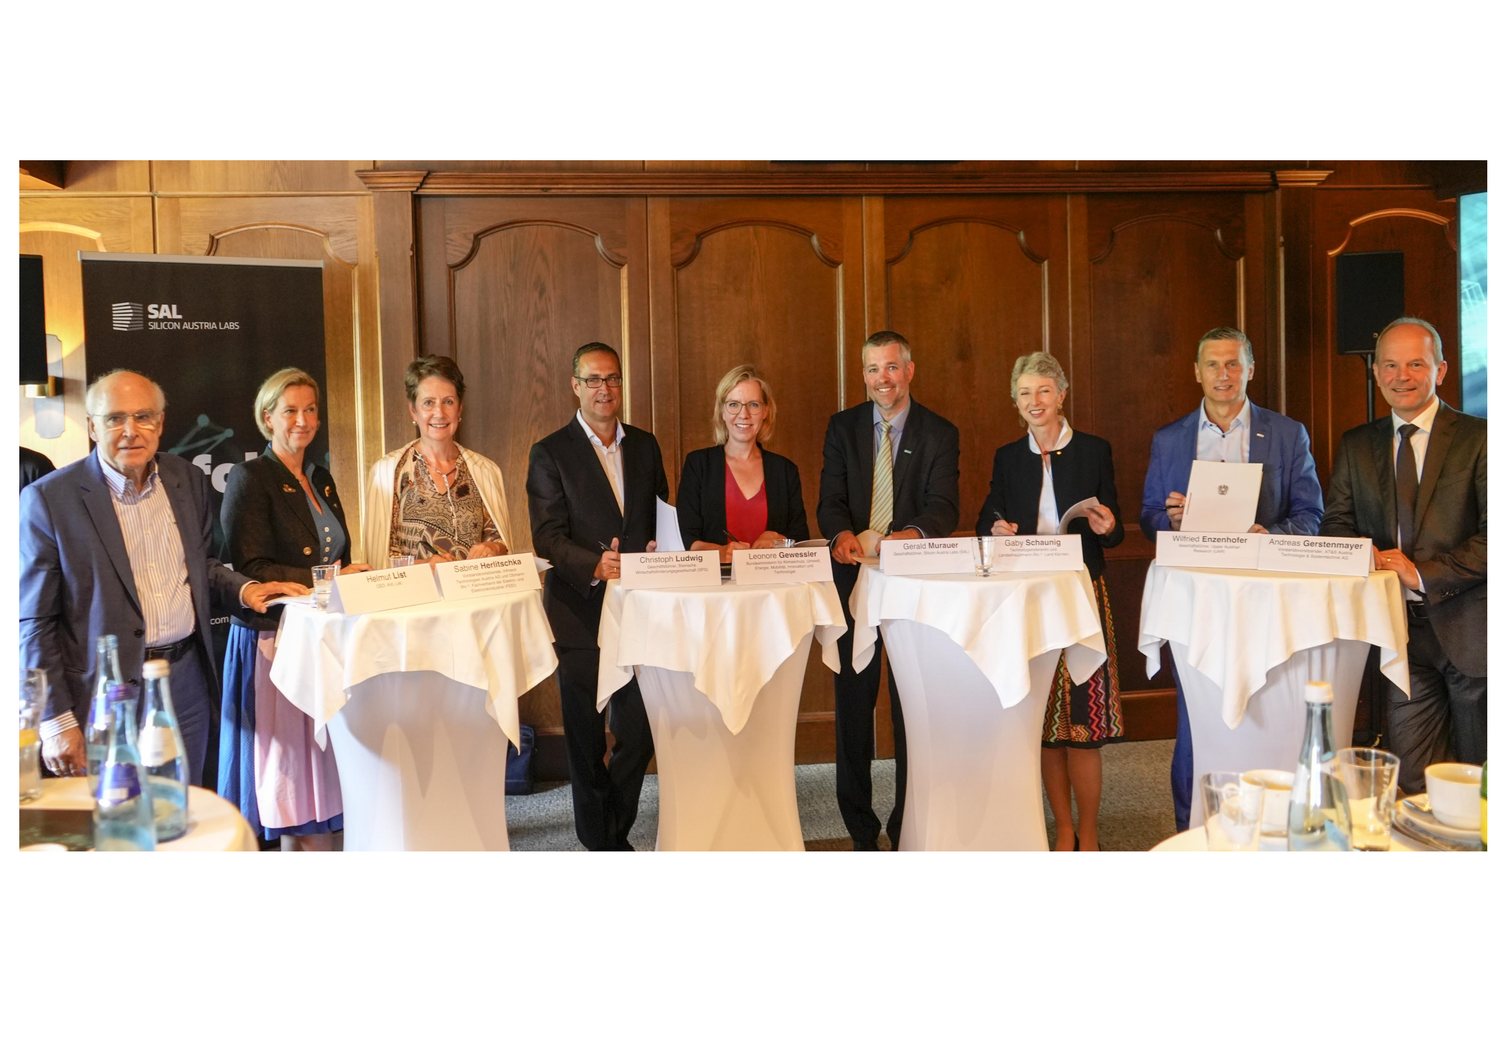 Helmut List, Marion Mitsch, Sabine Herlitschka, Christoph Ludwig, Leonore Gewessler, Gerald Murauer, Gaby Schaunig, Wilfried Enzenhofer, Andreas Gerstenmayer, standing side by side with a statement on the further support of the SAL Center of Excellence, founded in 2018, in their hand